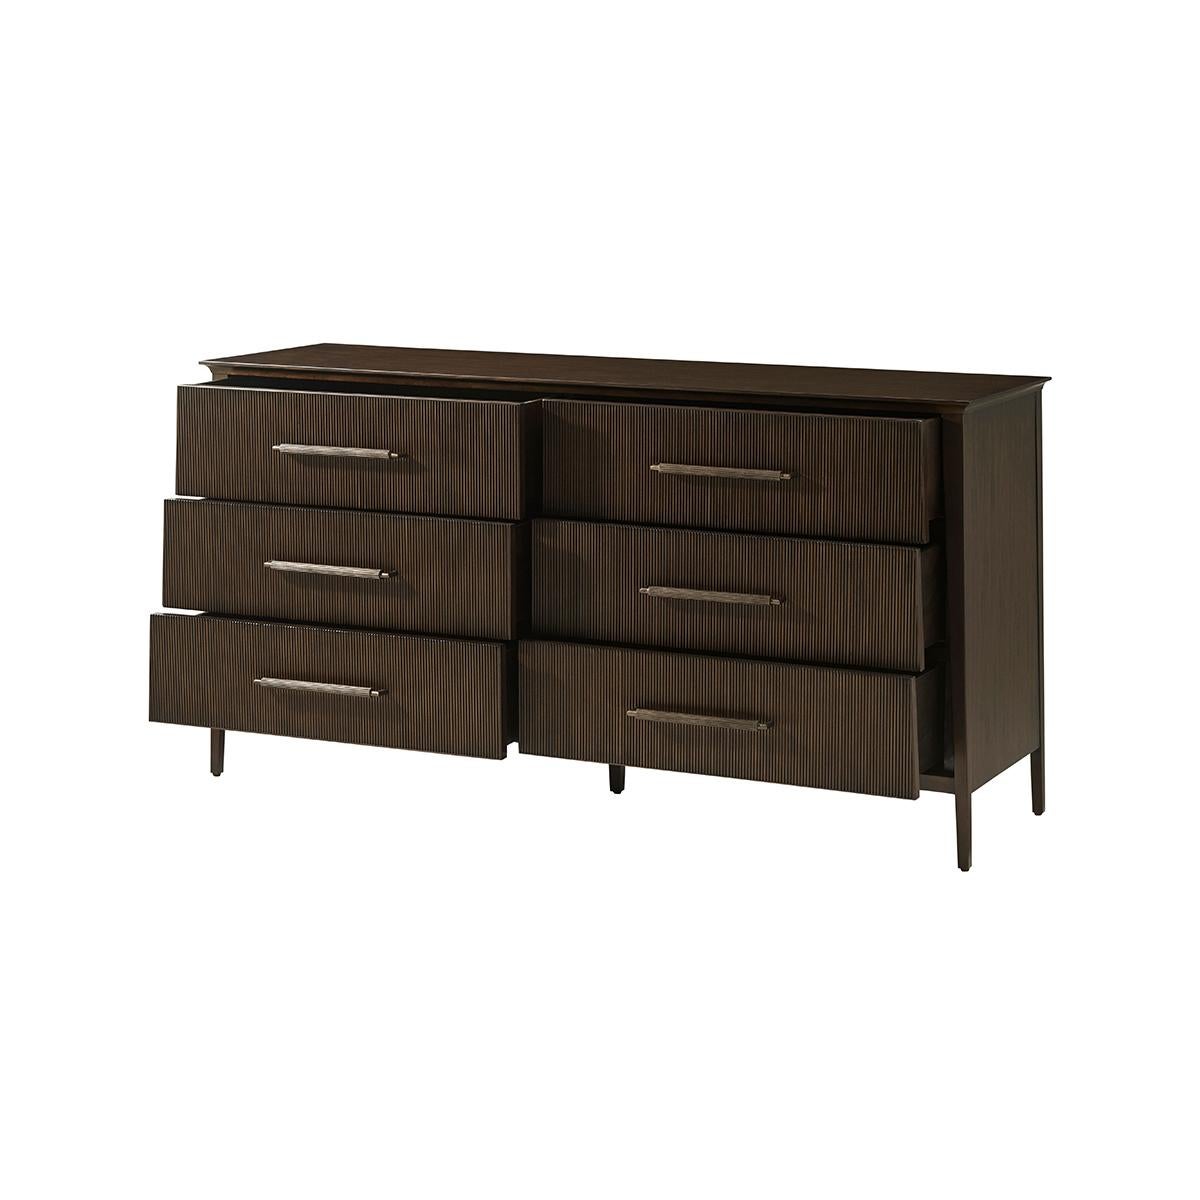 Features a sophisticated tapered silhouette with six reeded drawer fronts. The custom forged hardware, finished in a dark rubbed bronze, echoes the reeded details throughout.

Dimensions: 65